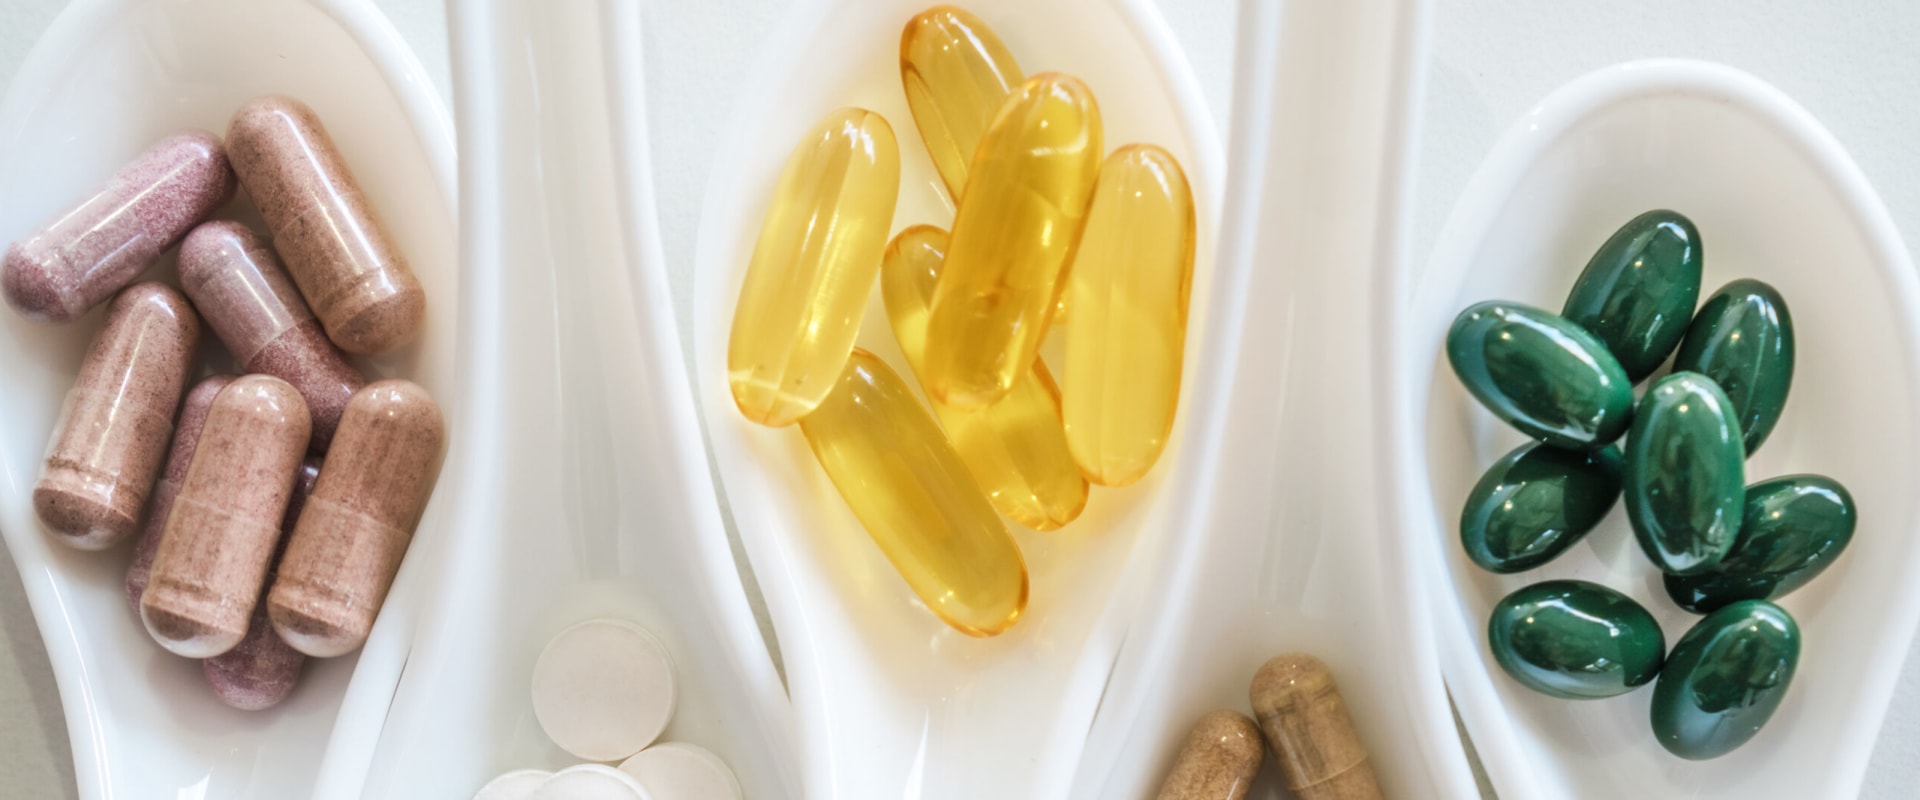 Are Dietary Supplements Regulated by the FDA?